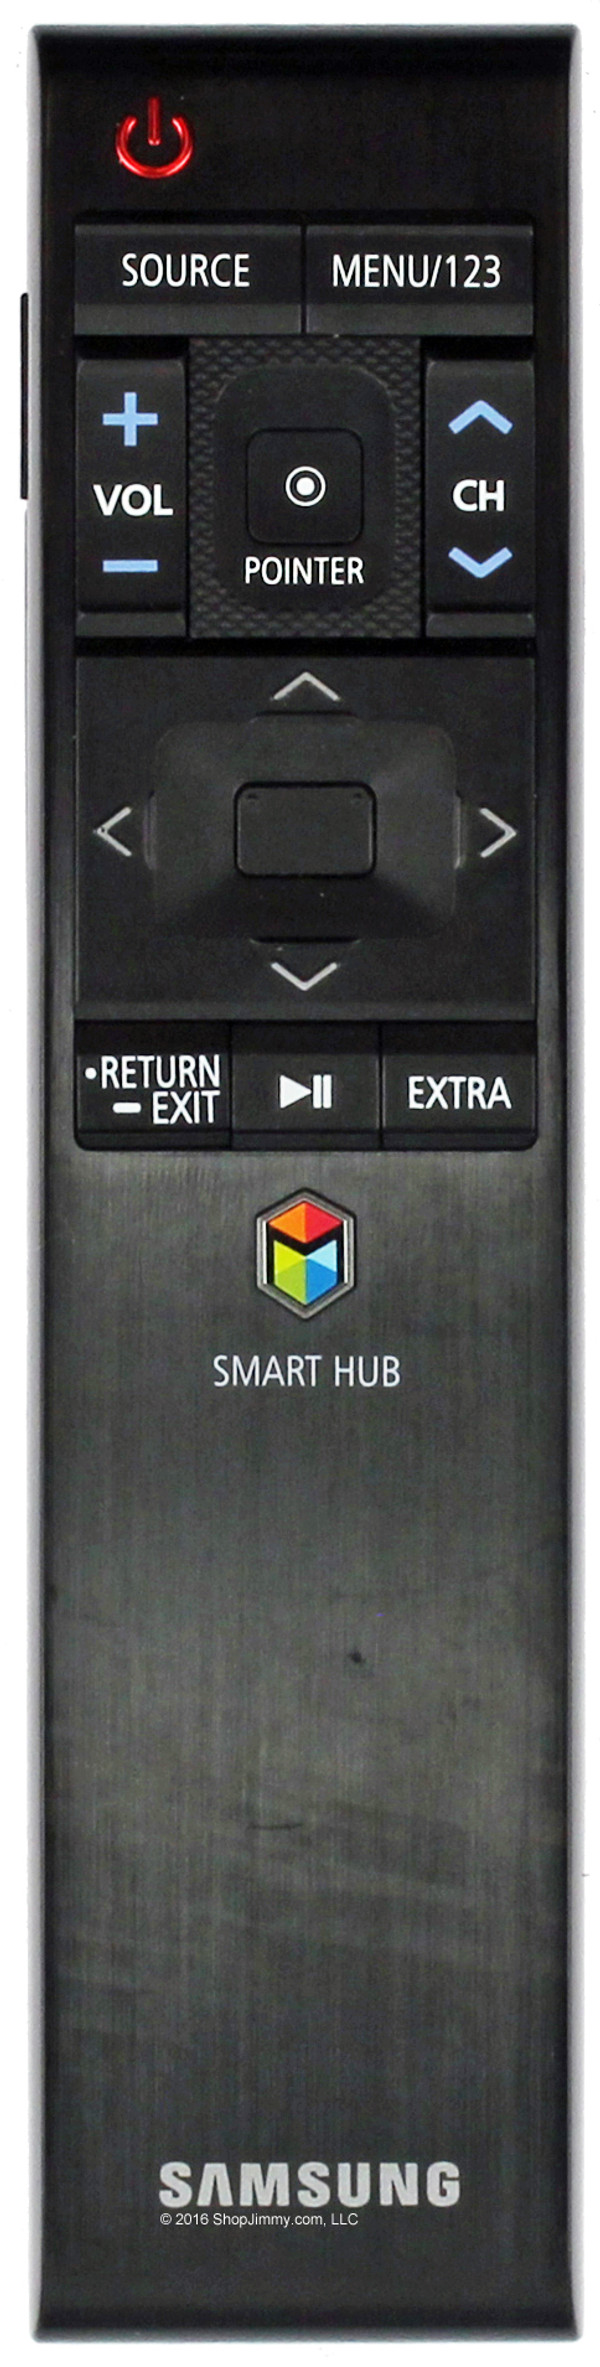 Samsung BN59-01220J Remote Control--Open Package